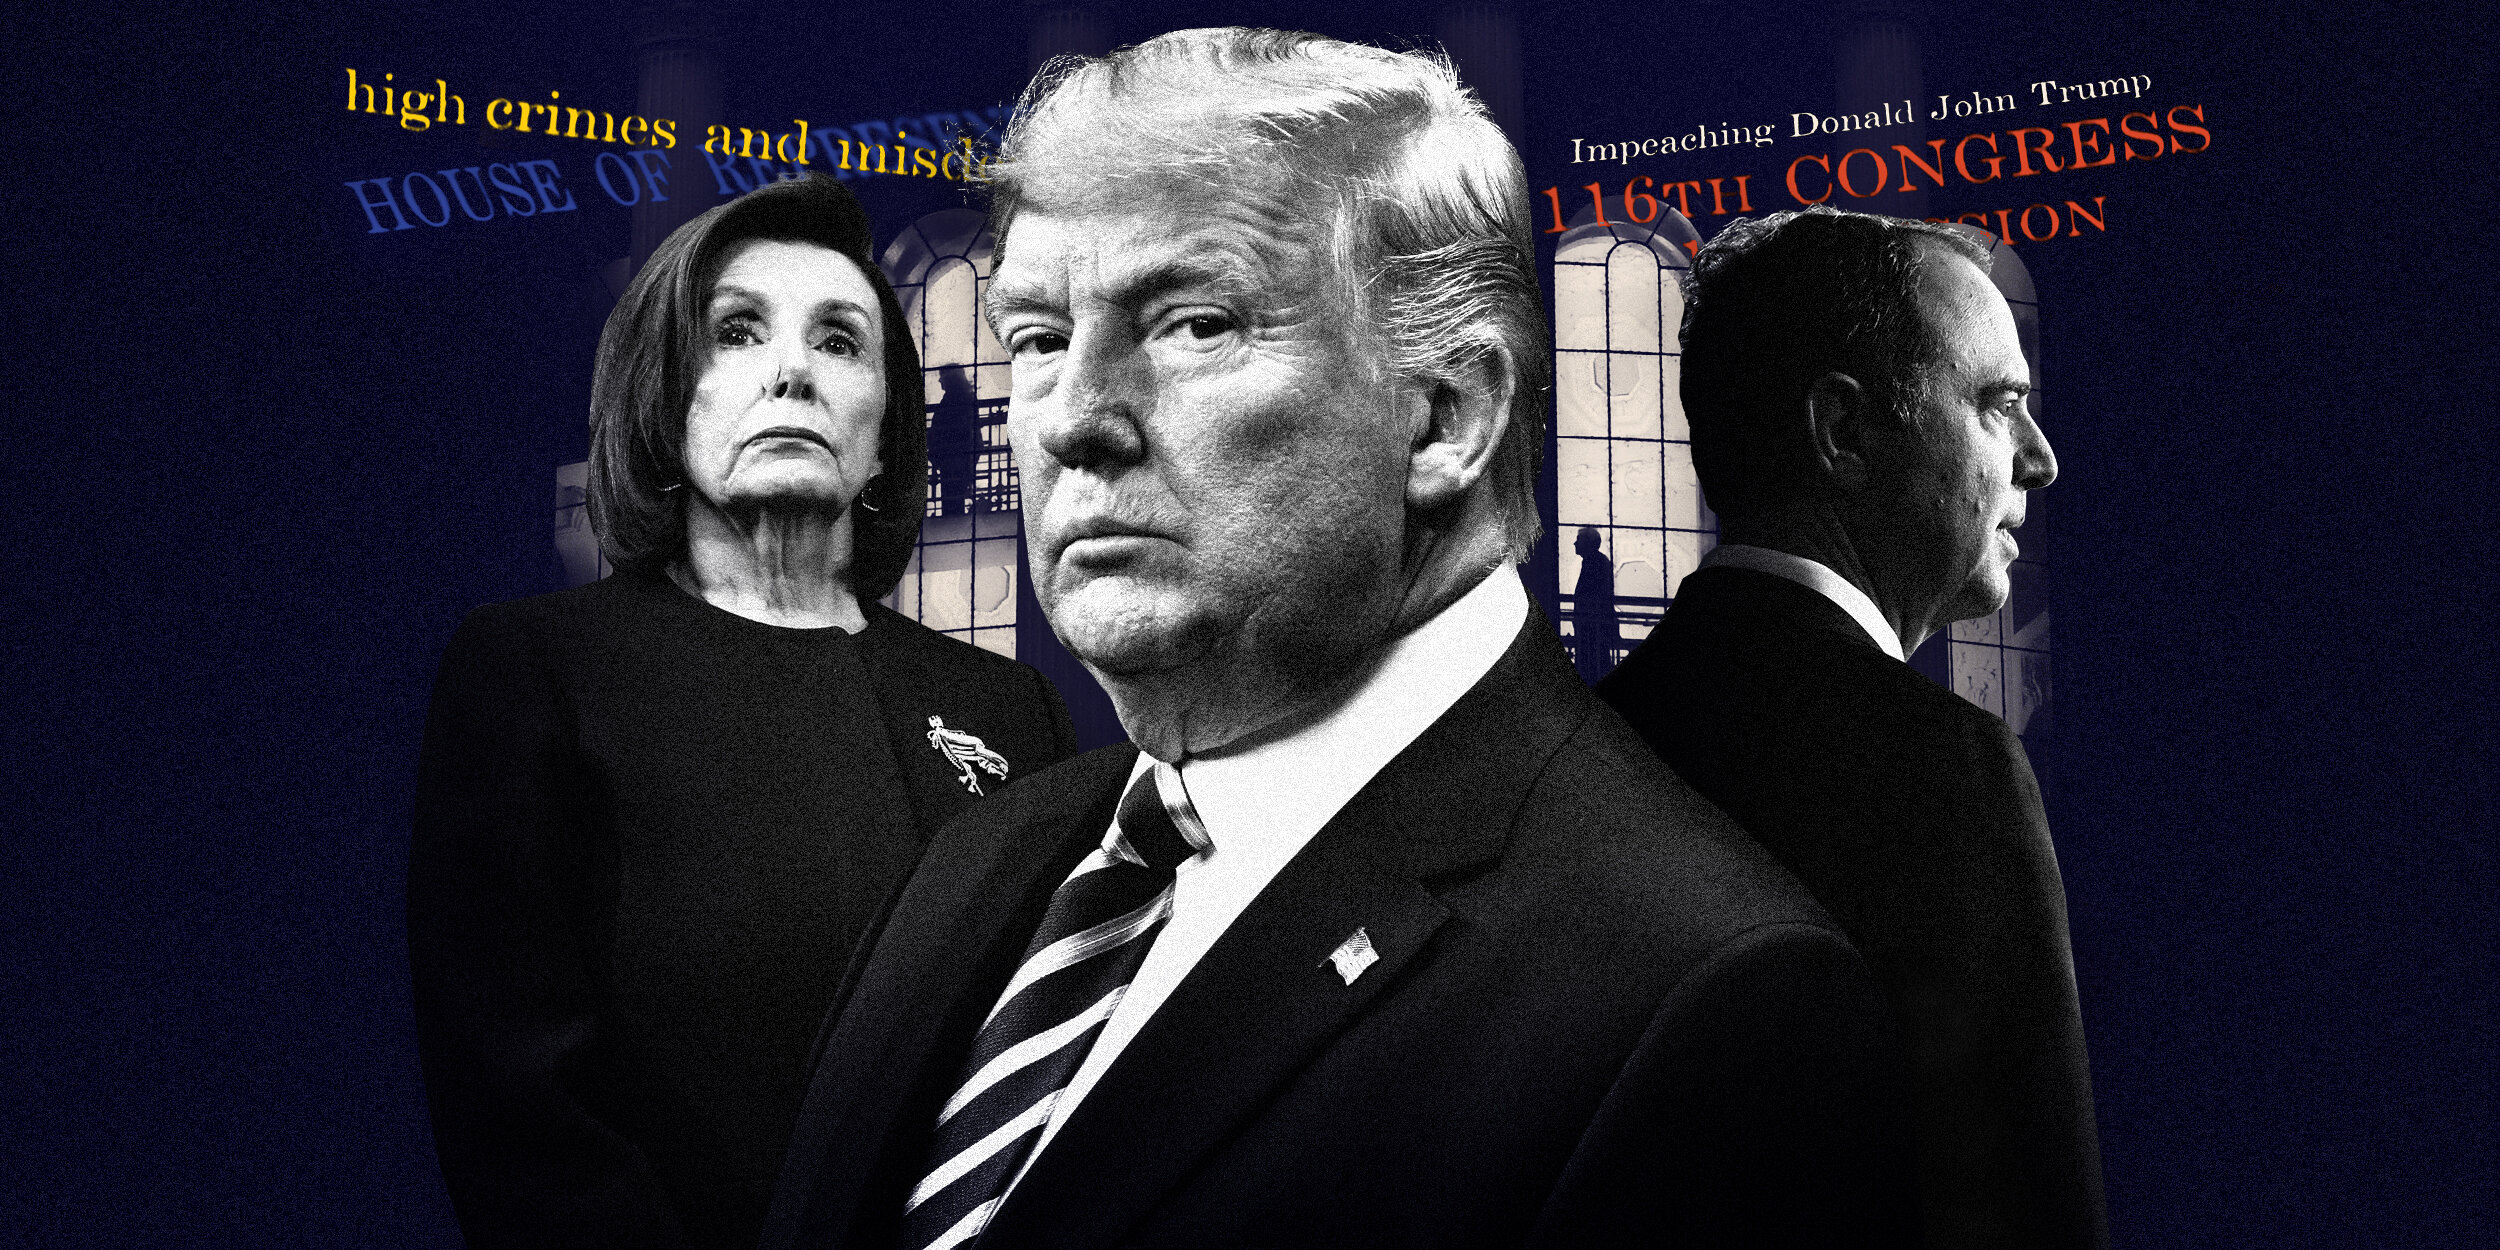   Live updates: Trump impeached by the House on both articles   AD:  Kara Haupt  